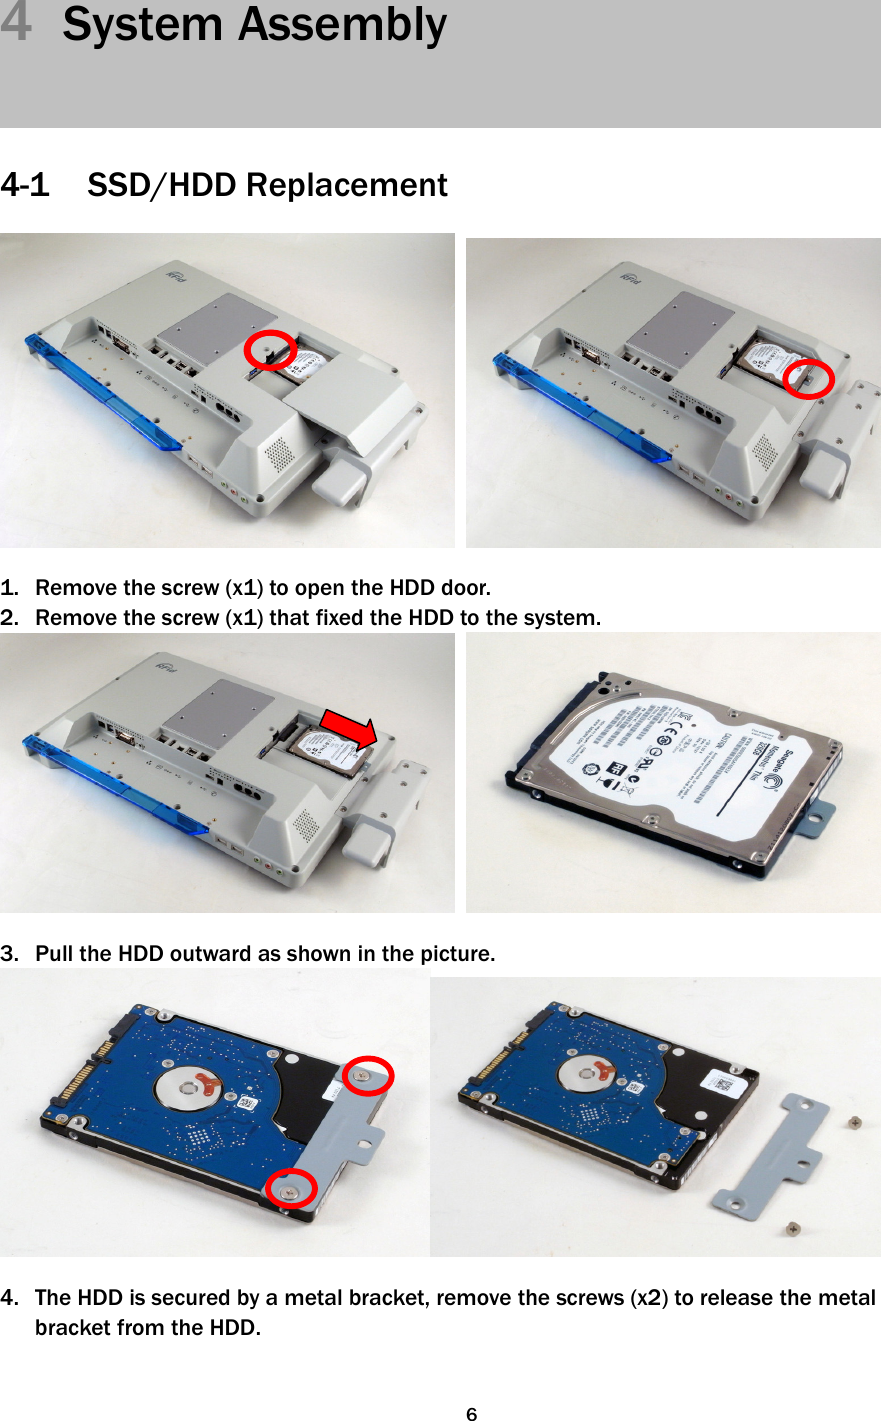   64  System Assembly     4-1 SSD/HDD Replacement     1. Remove the screw (x1) to open the HDD door. 2. Remove the screw (x1) that fixed the HDD to the system.     3. Pull the HDD outward as shown in the picture.   4. The HDD is secured by a metal bracket, remove the screws (x2) to release the metal bracket from the HDD.   